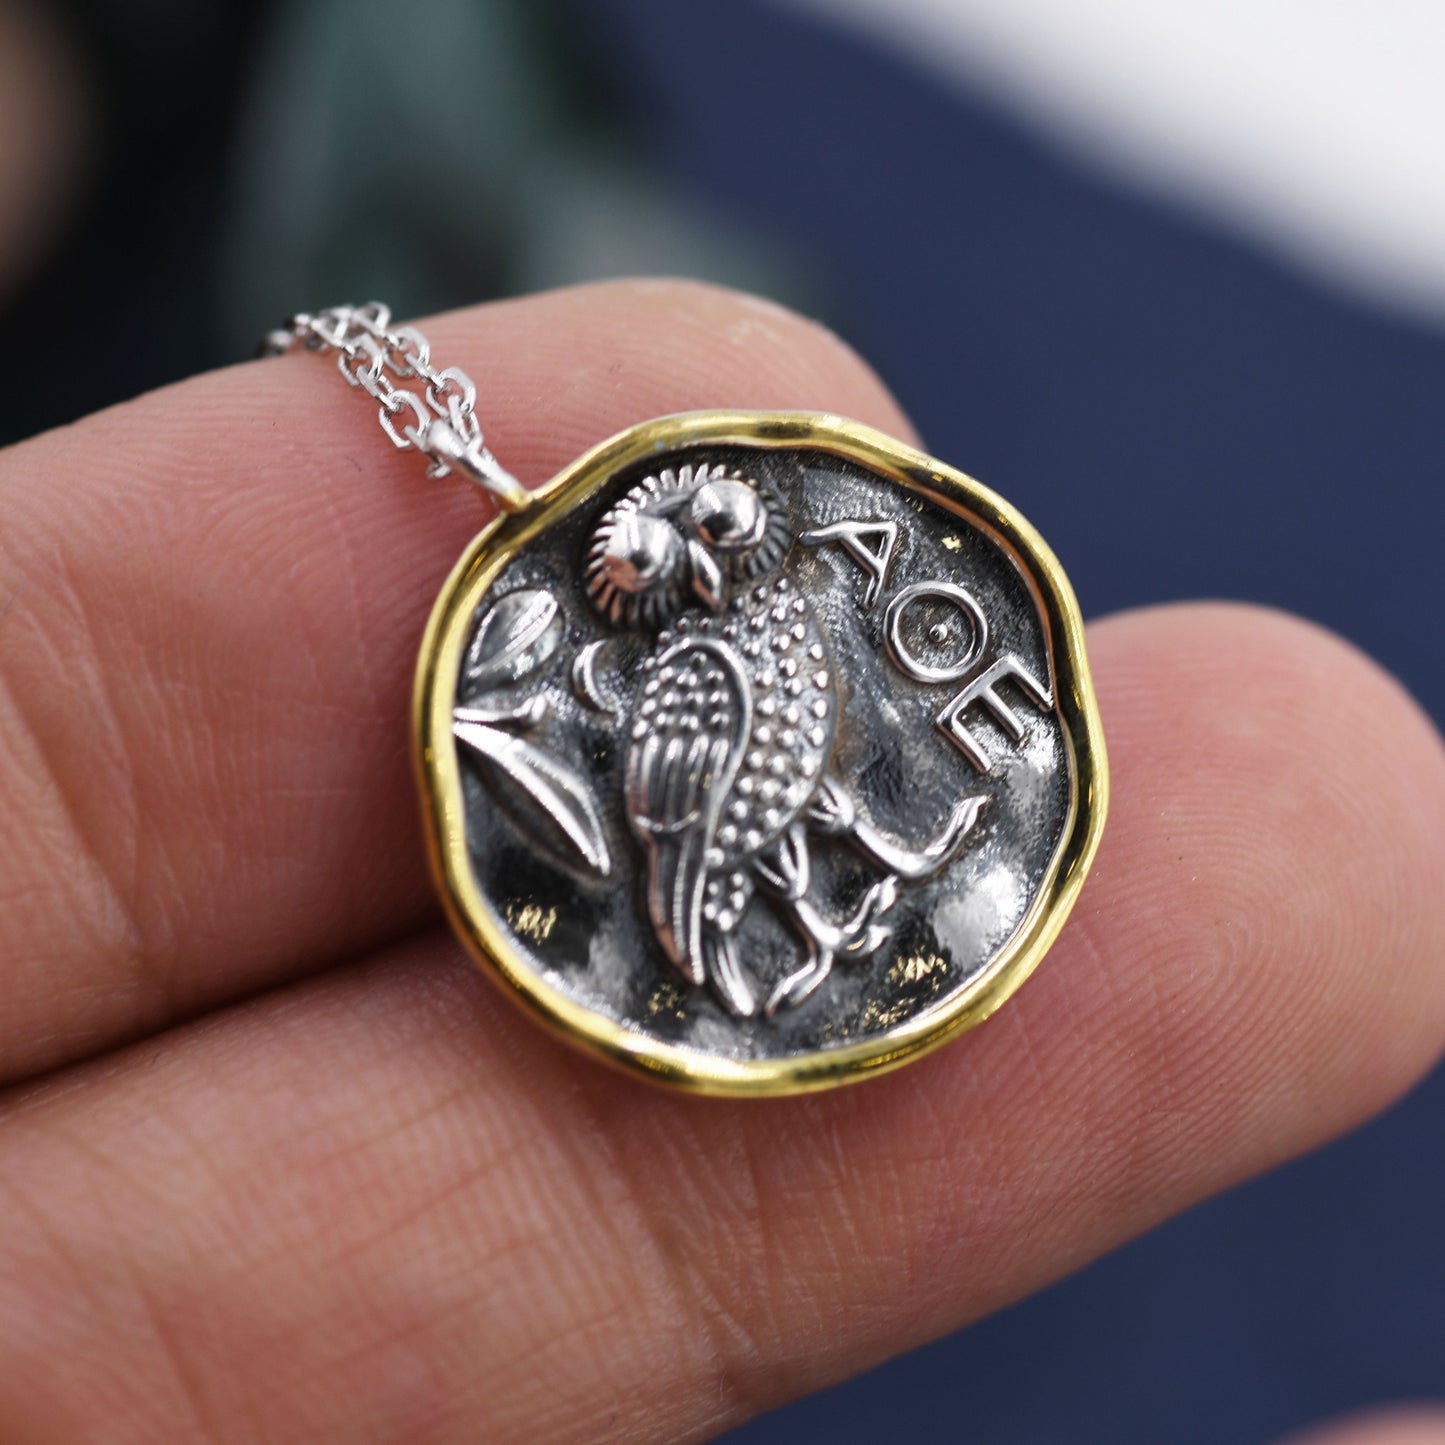 Sterling Silver Greek Coin Pendant Necklace - Owl Coin Necklace , Owl of Athena Coin Necklace in Antique Silver, Ancient Greek Coin Inspired